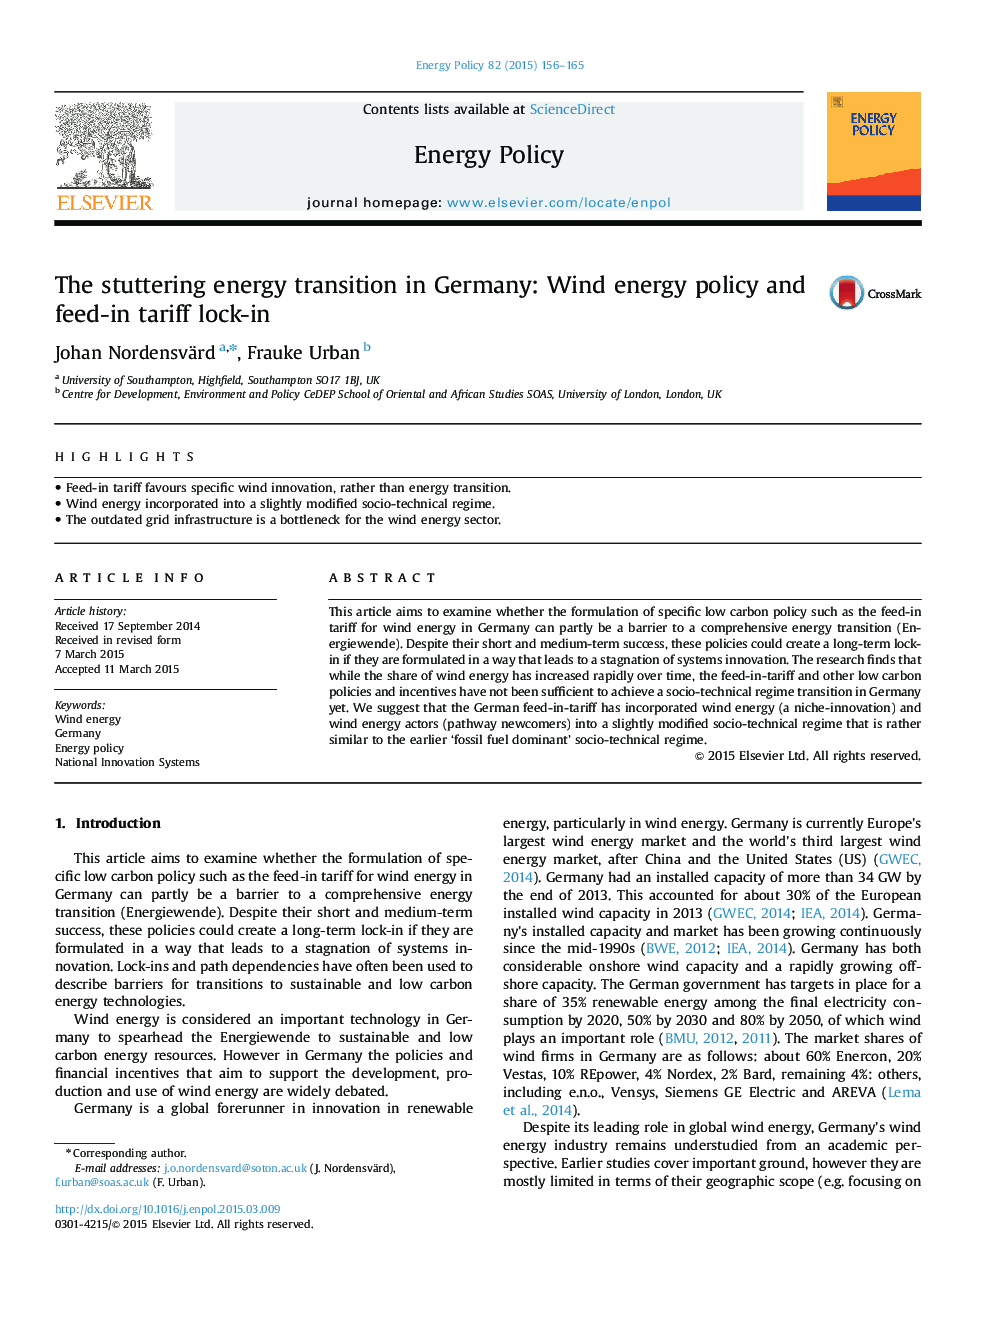 The stuttering energy transition in Germany: Wind energy policy and feed-in tariff lock-in